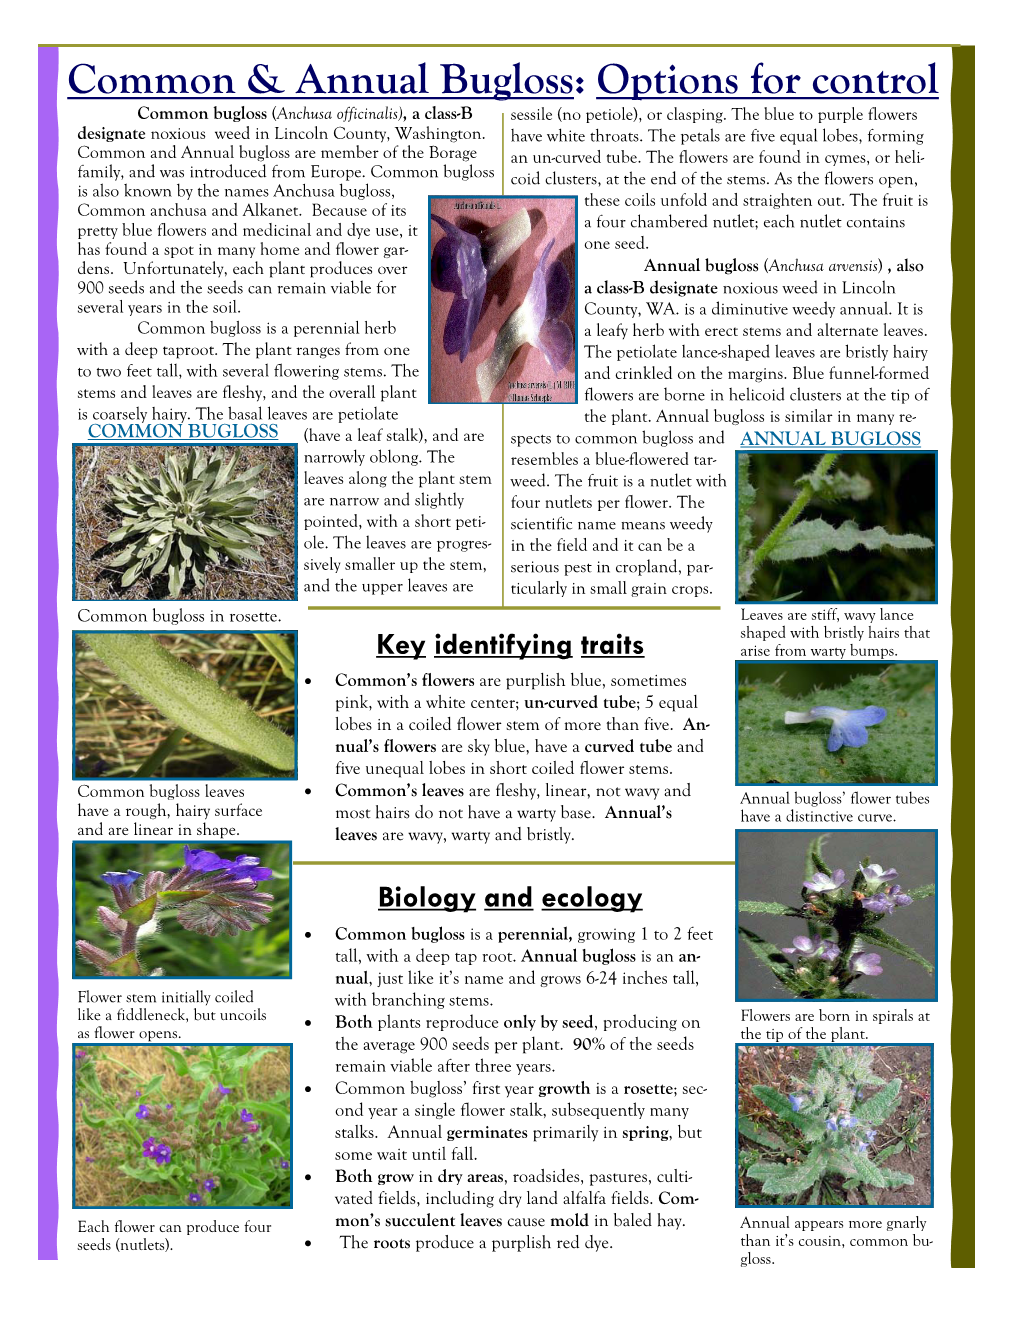 Common & Annual Bugloss: Options for Control